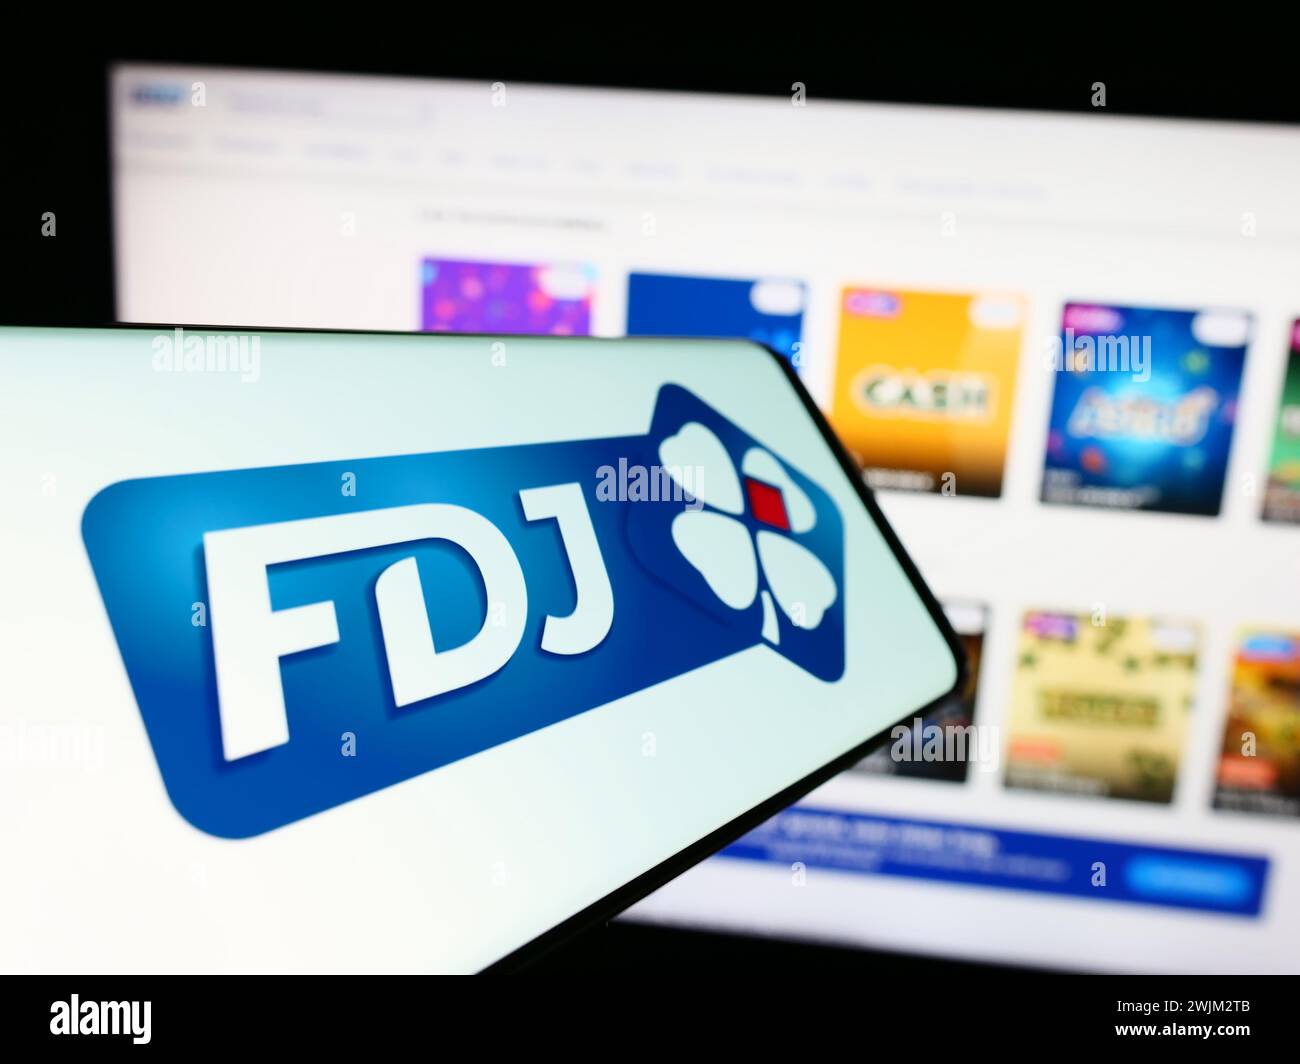 Mobile phone with logo of French lottery company Francaise des Jeux (FDJ) in front of business website. Focus on center of phone display. Stock Photo